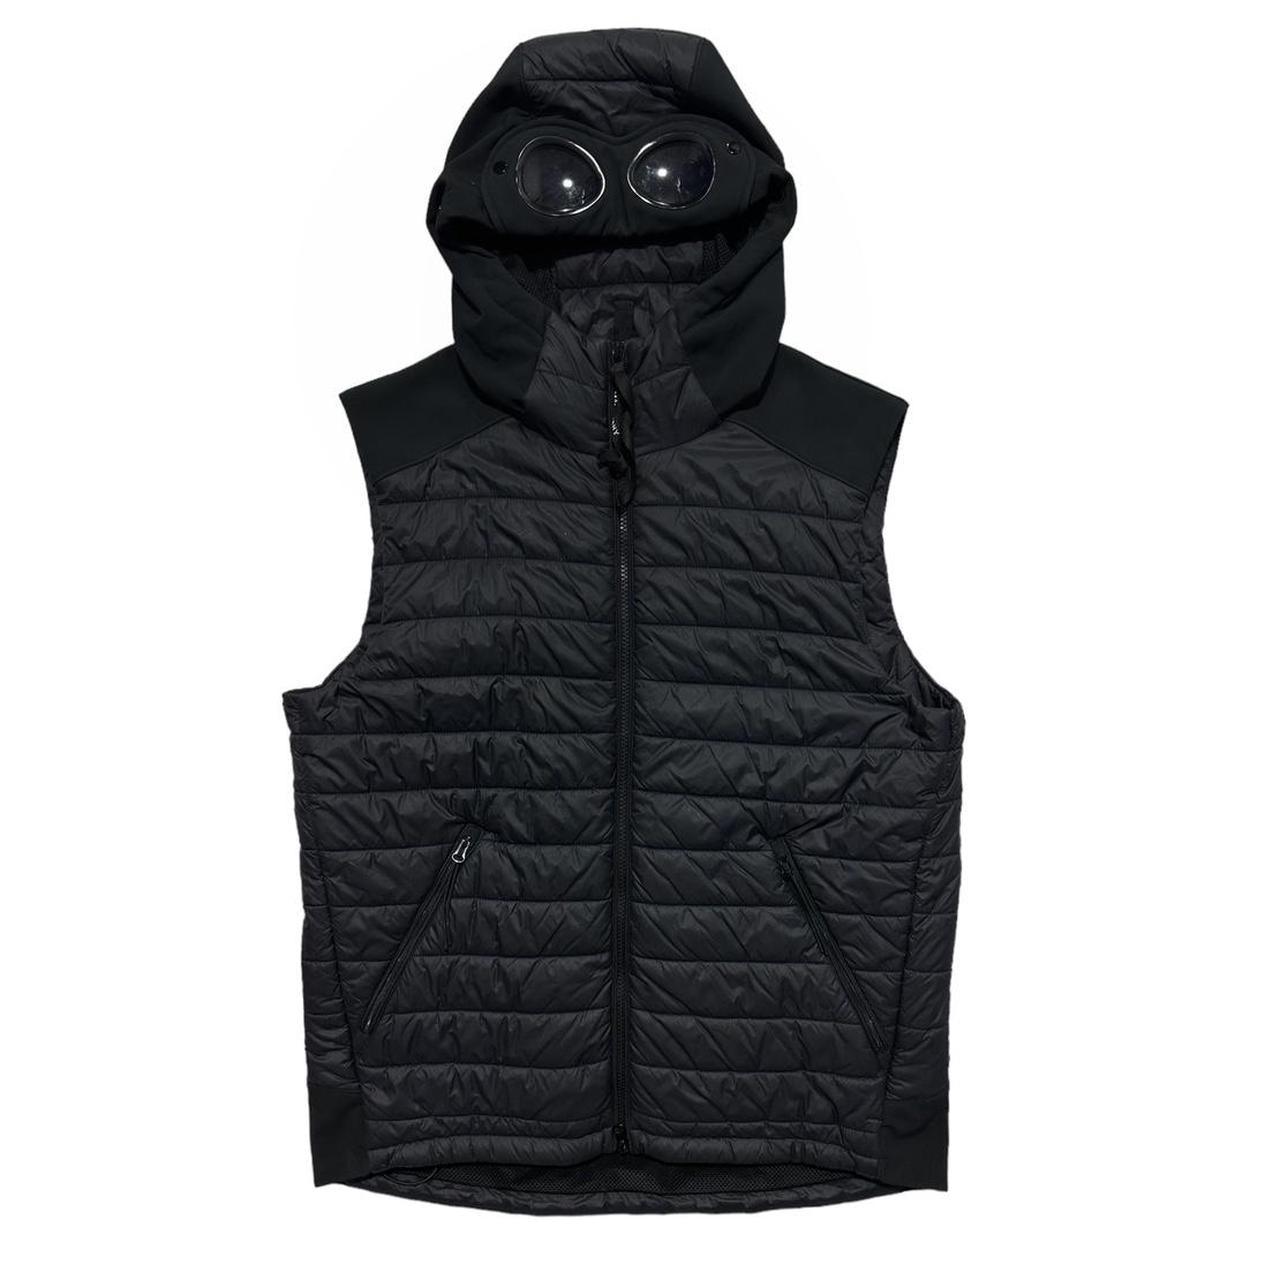 CP Company Goggle Gilet - Known Source